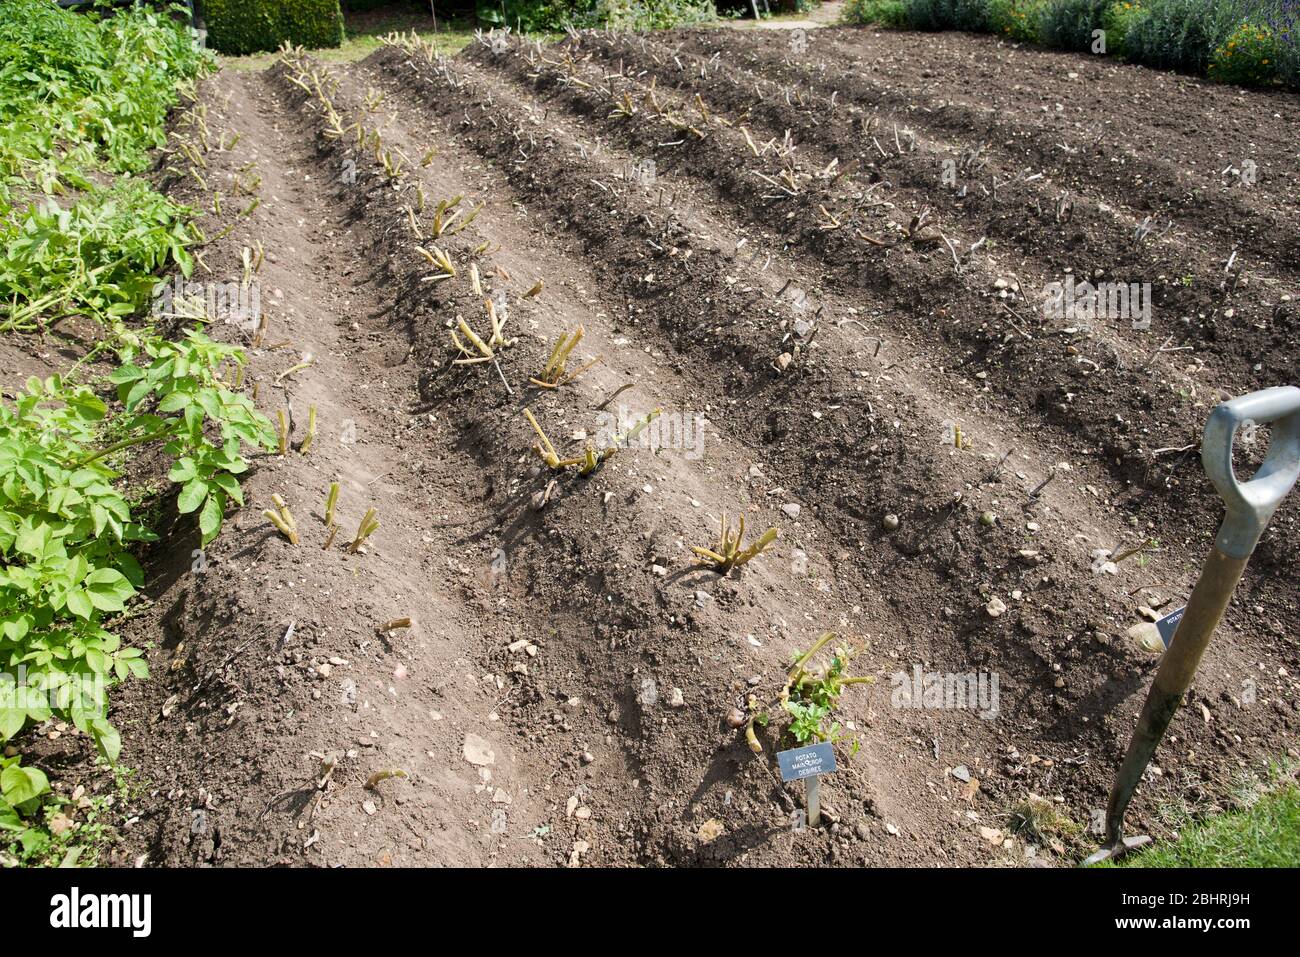 Rows of maturing potato plants, the haulm of some removed to control potato blight. Stock Photo